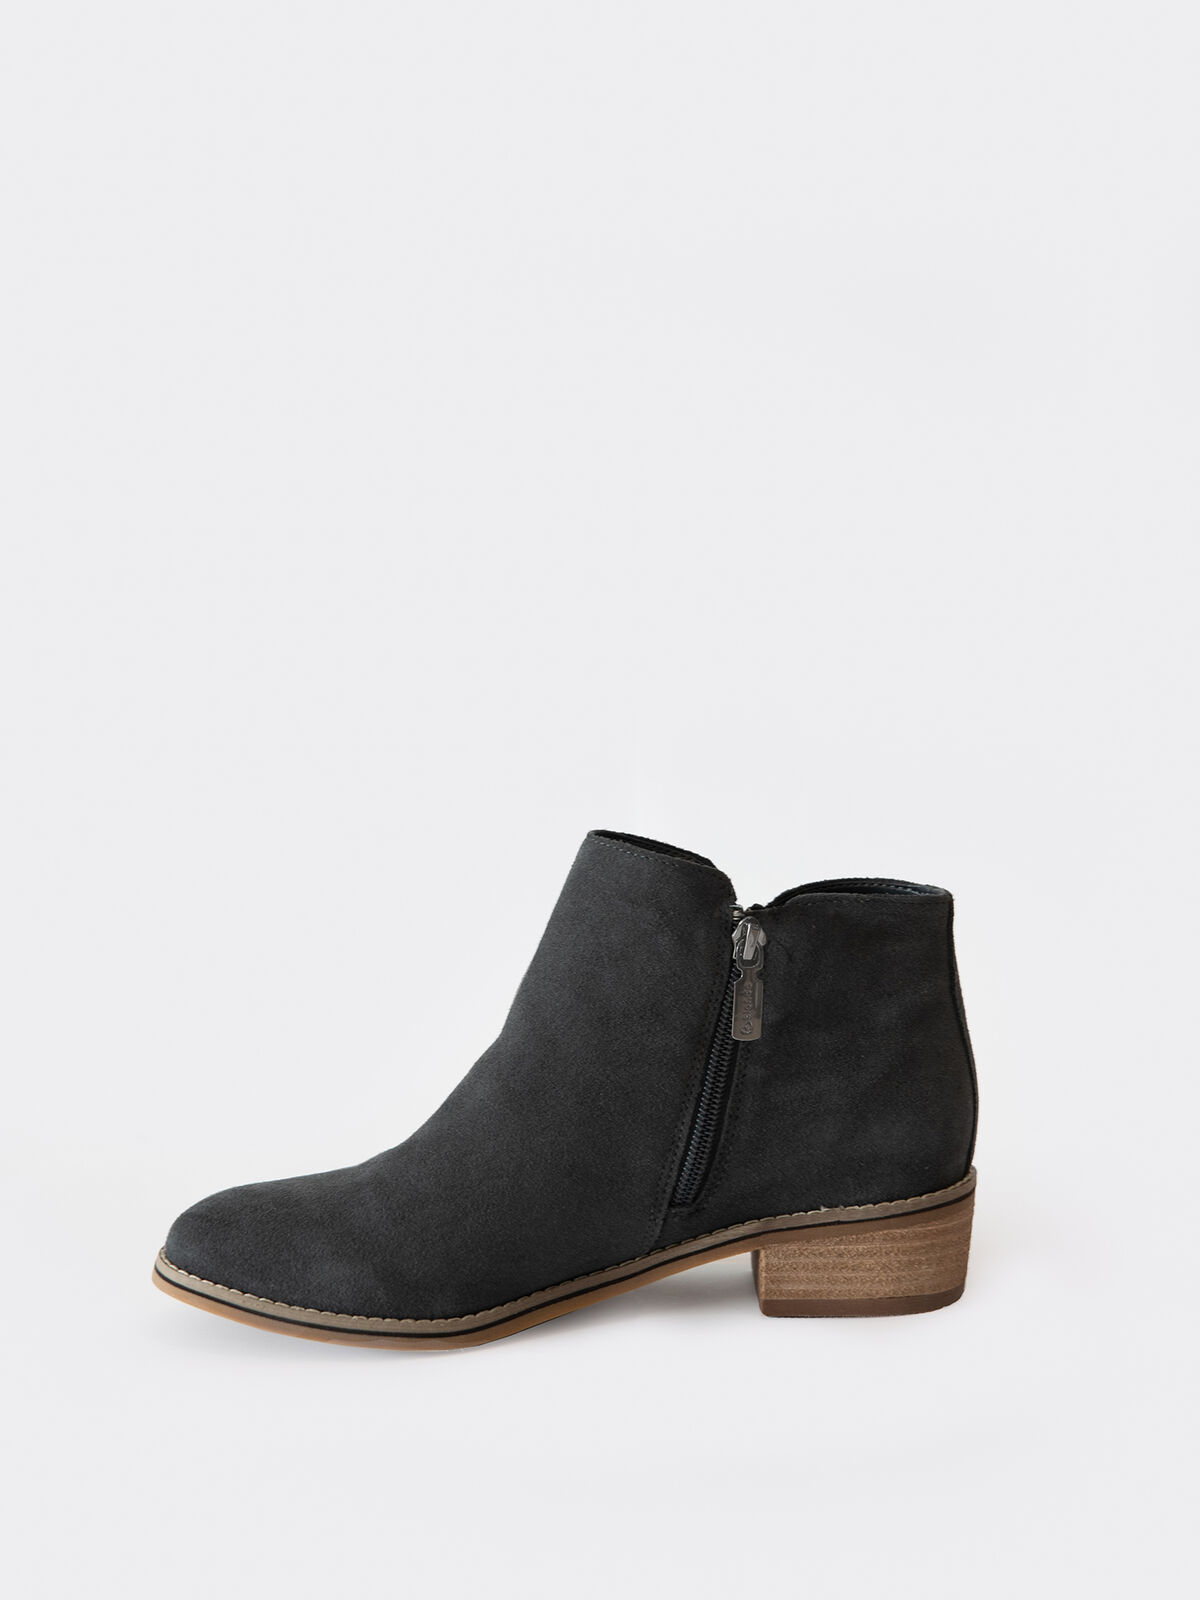 Blondo Liam Ankle Boot